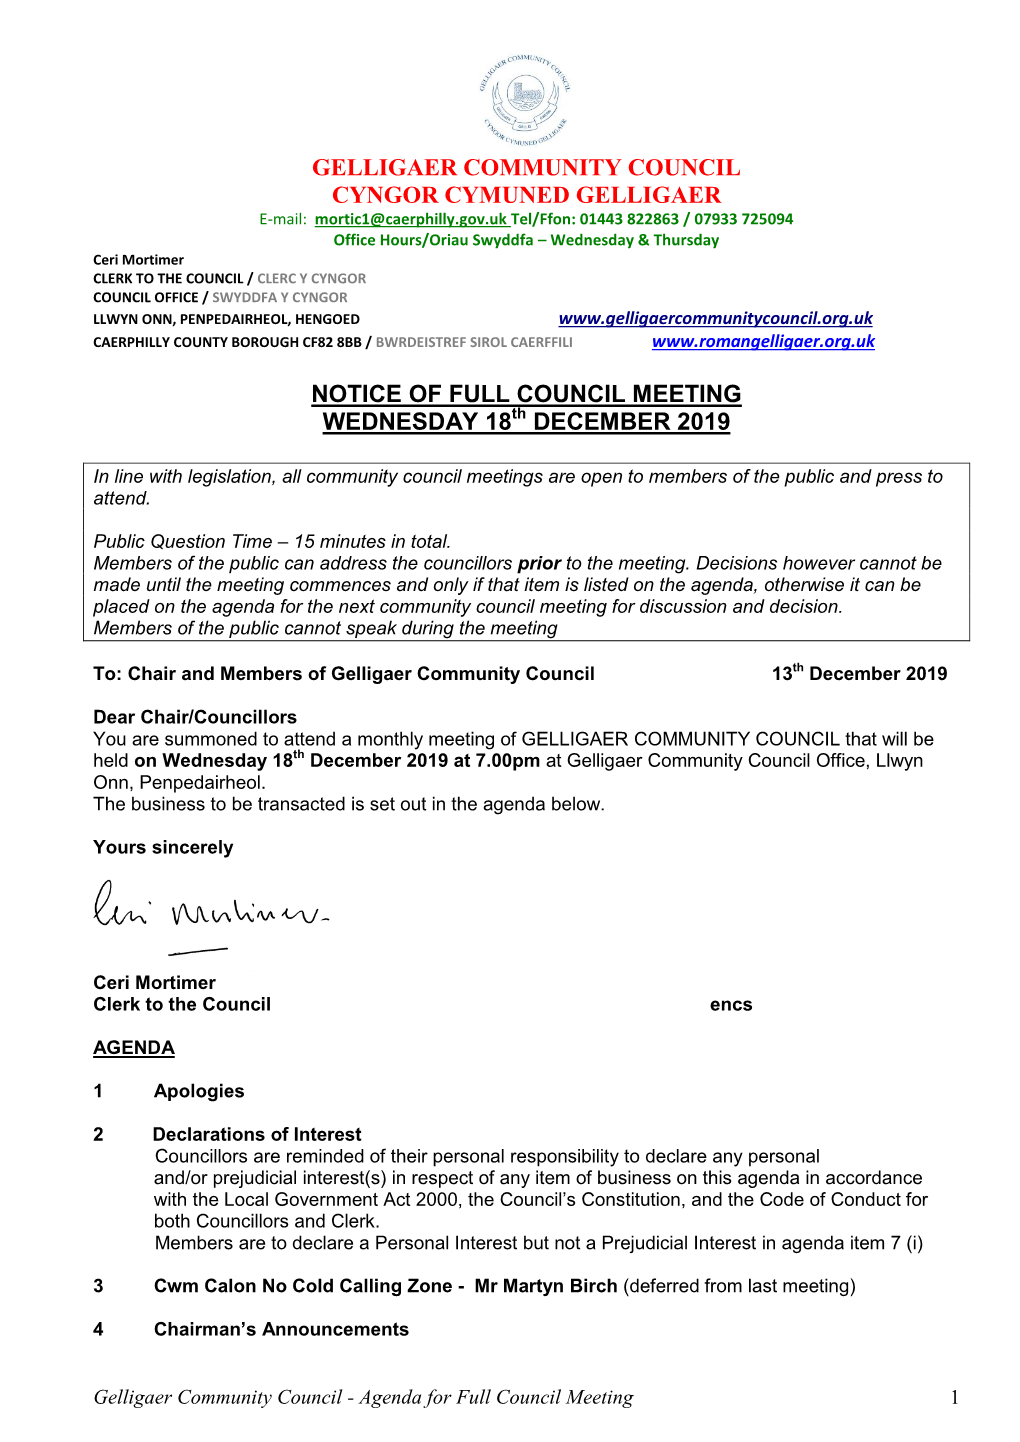 Agenda, Otherwise It Can Be Placed on the Agenda for the Next Community Council Meeting for Discussion and Decision